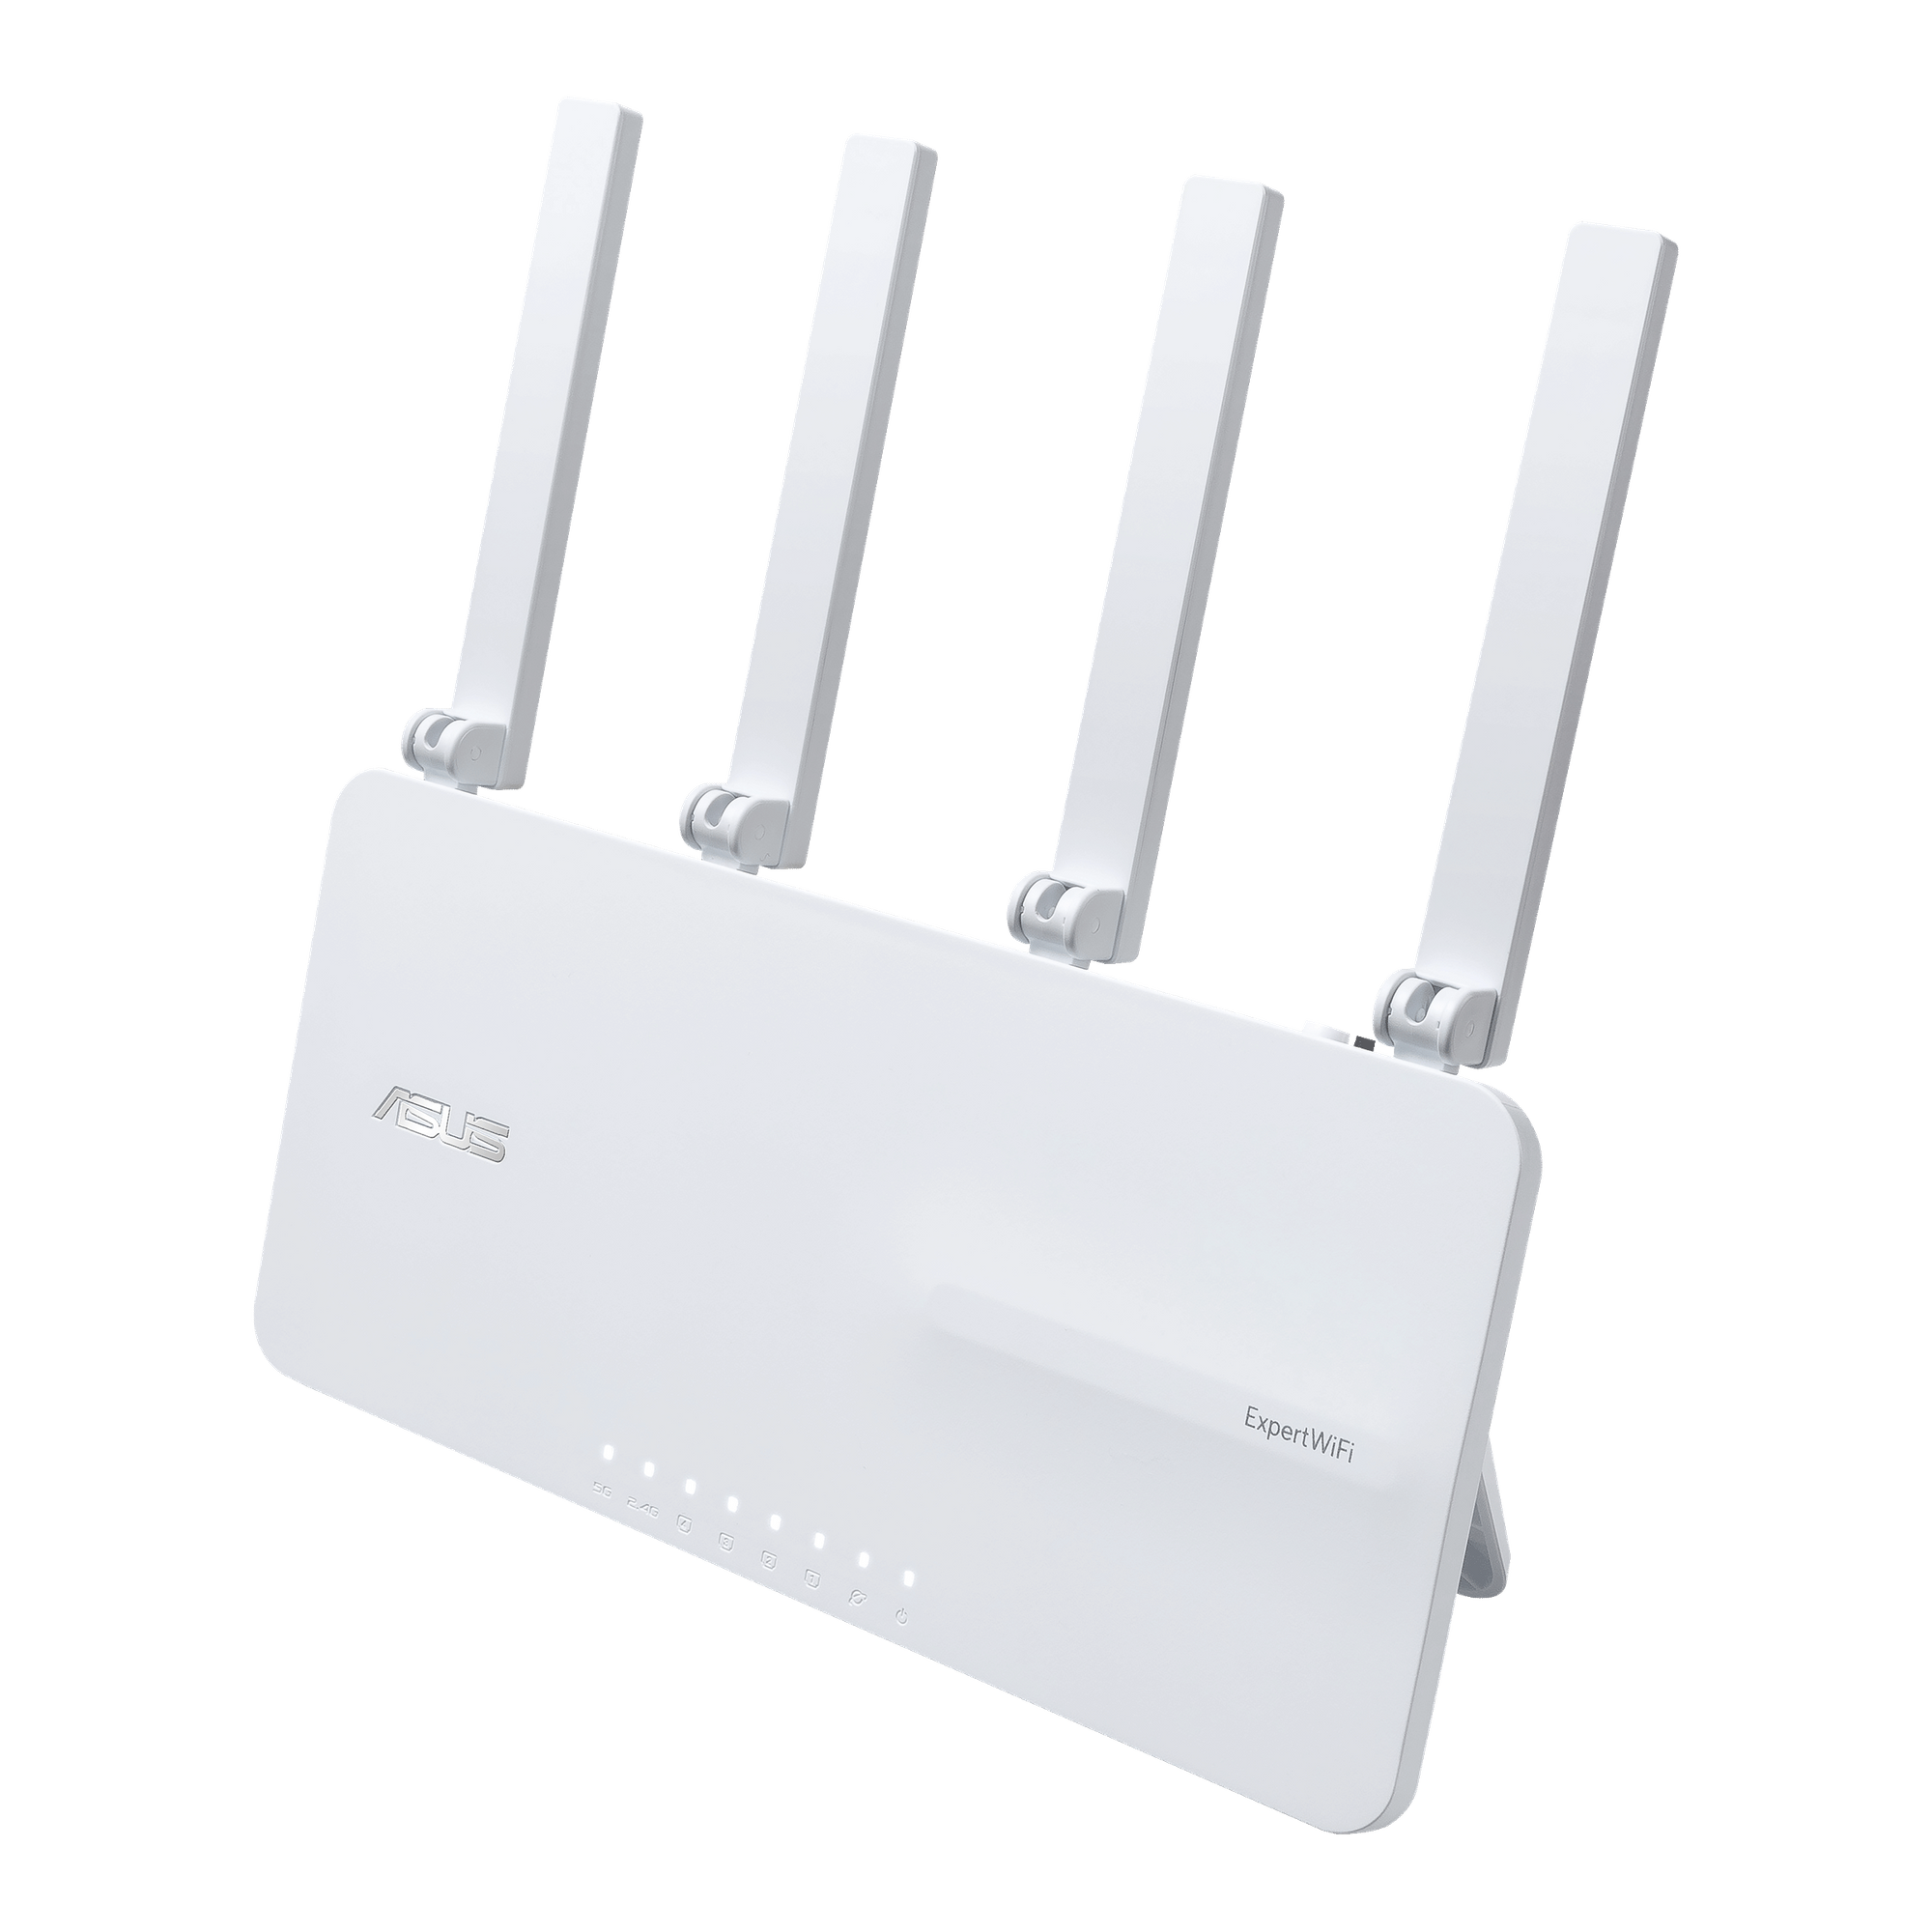 WLAN ExpertWiFi AX3000 EBR63 ASUS ROUTER